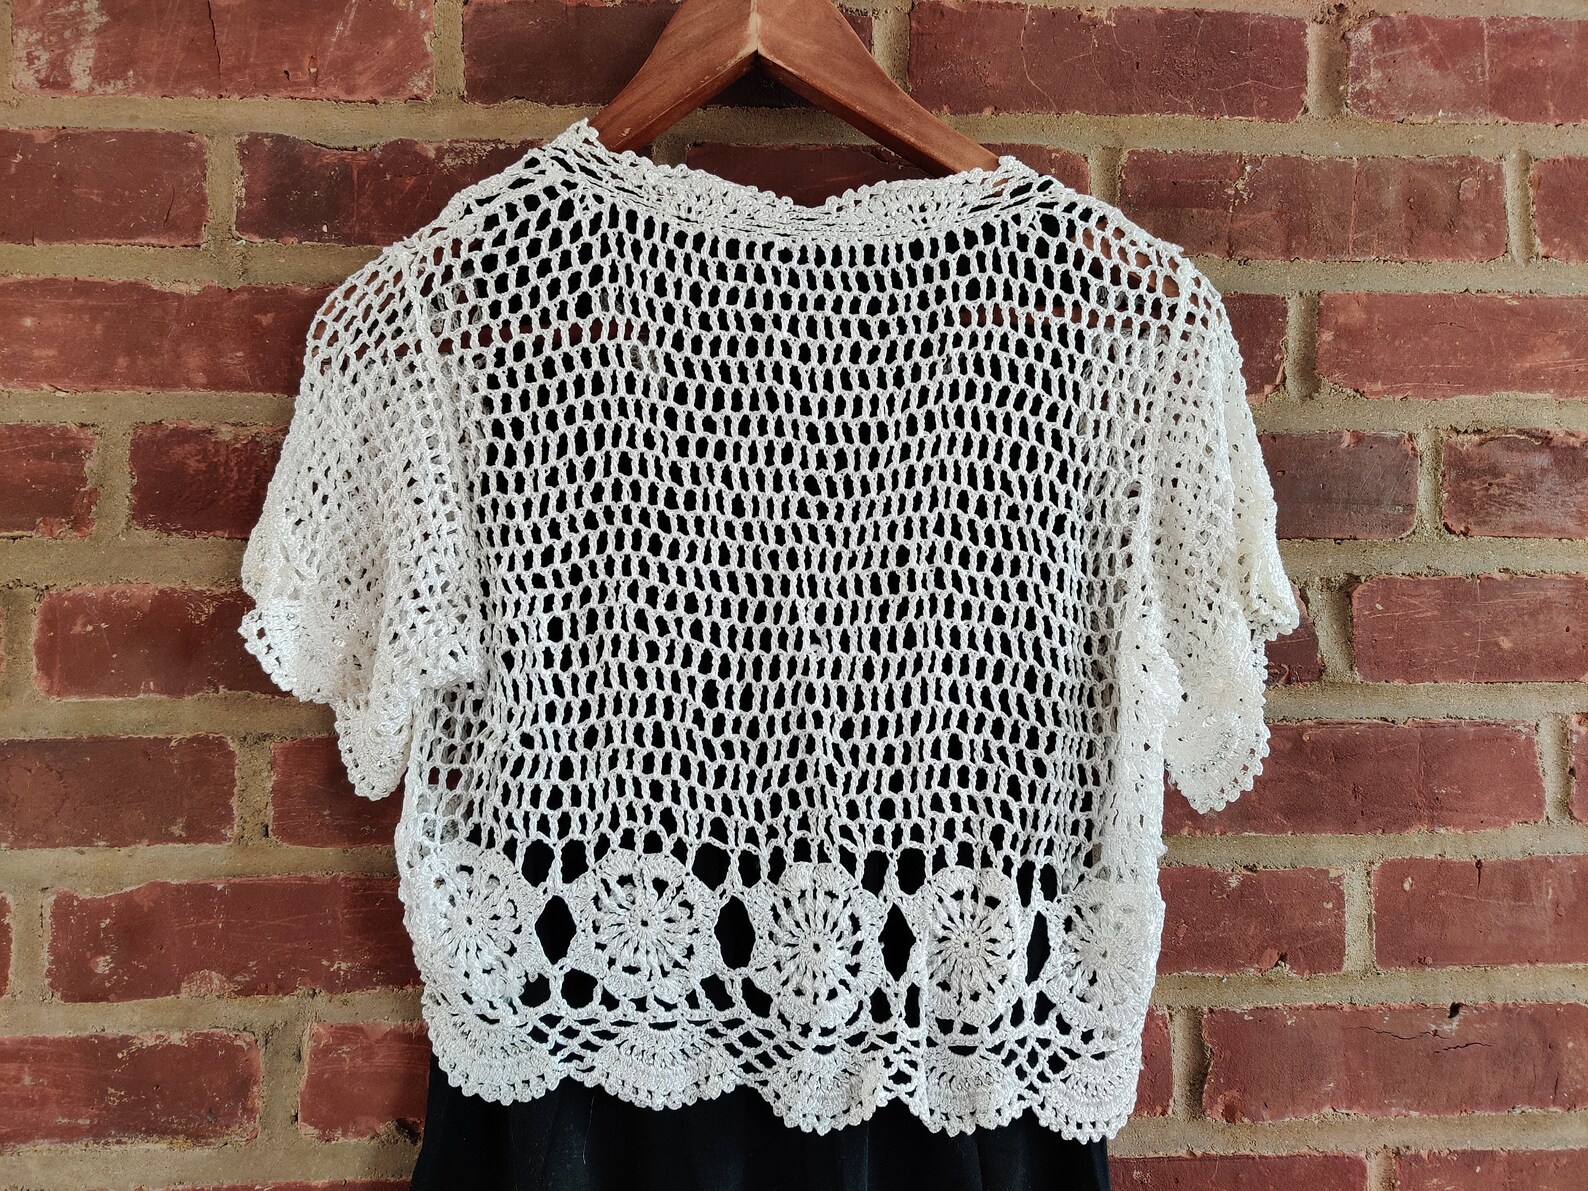 Handmade Crochet Lace Shawl Poncho One Size White Color With Crystal ...